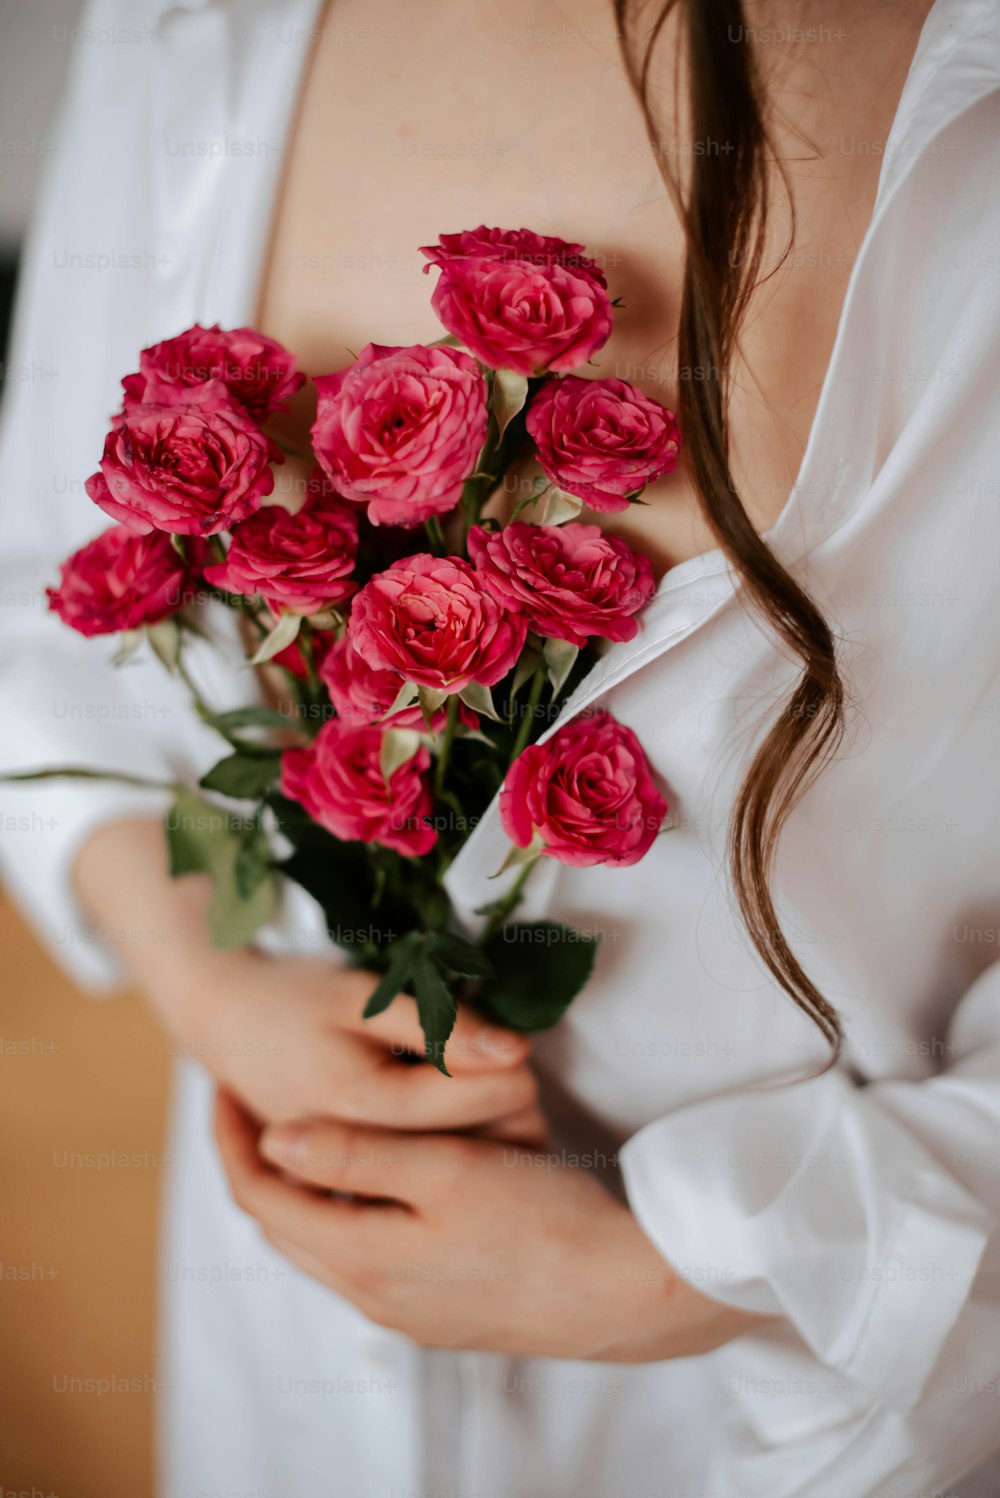 1000+ Rose Bouquet Pictures  Download Free Images on Unsplash